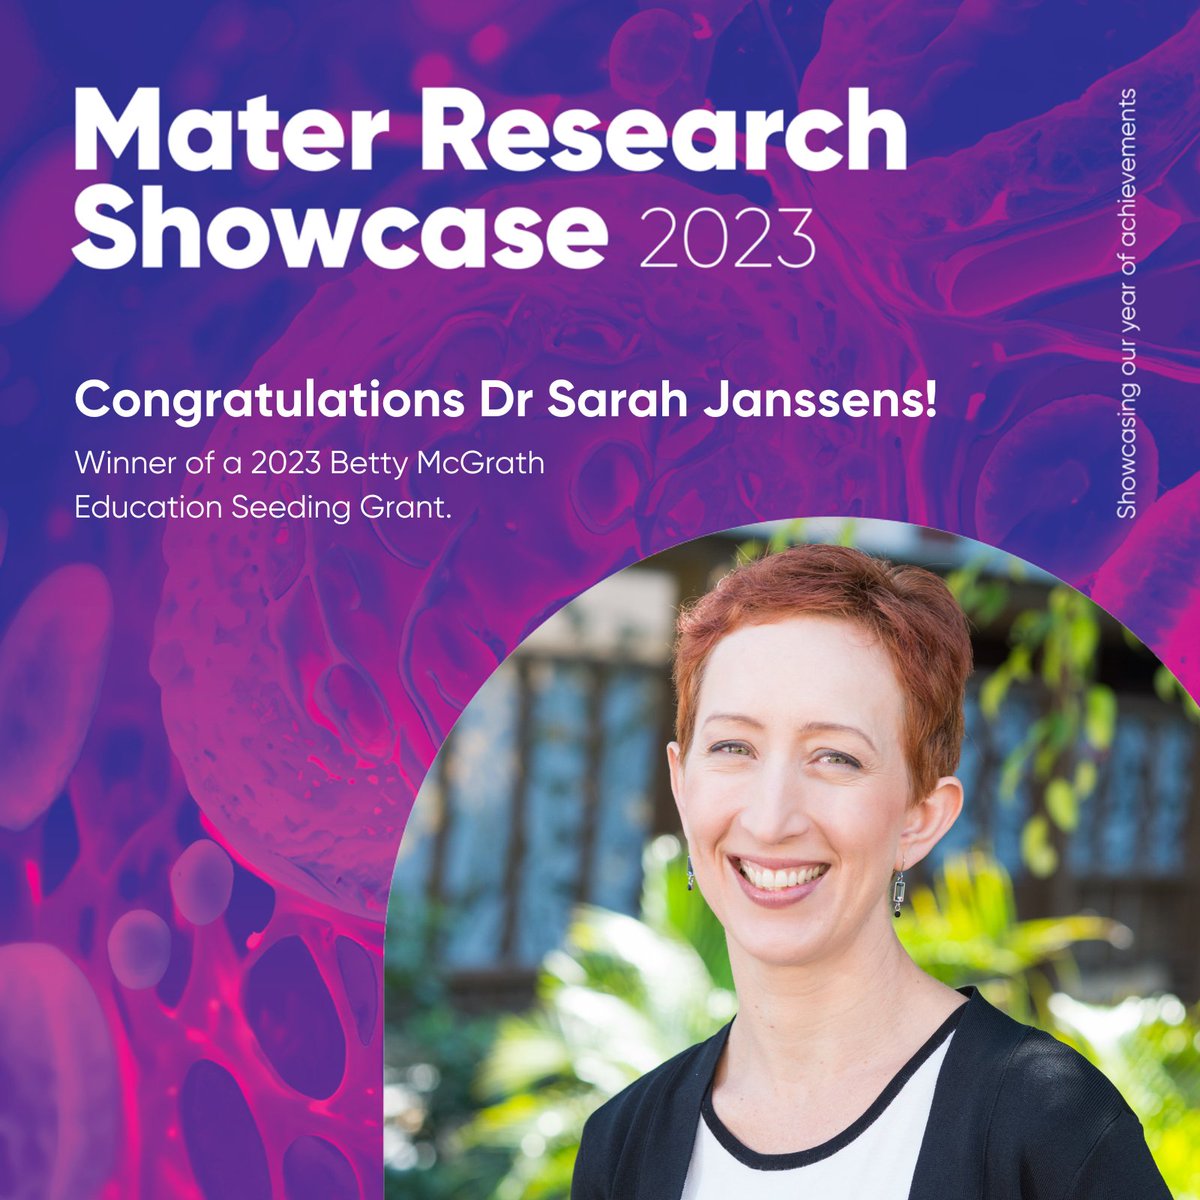 Congratulations to Dr Sarah Janssens, winner of a 2023 Betty McGrath Education Seeding Grant. Dr Janssens is Director of Obstetrics and Gynaecology at Mater Mothers’ Hospital.